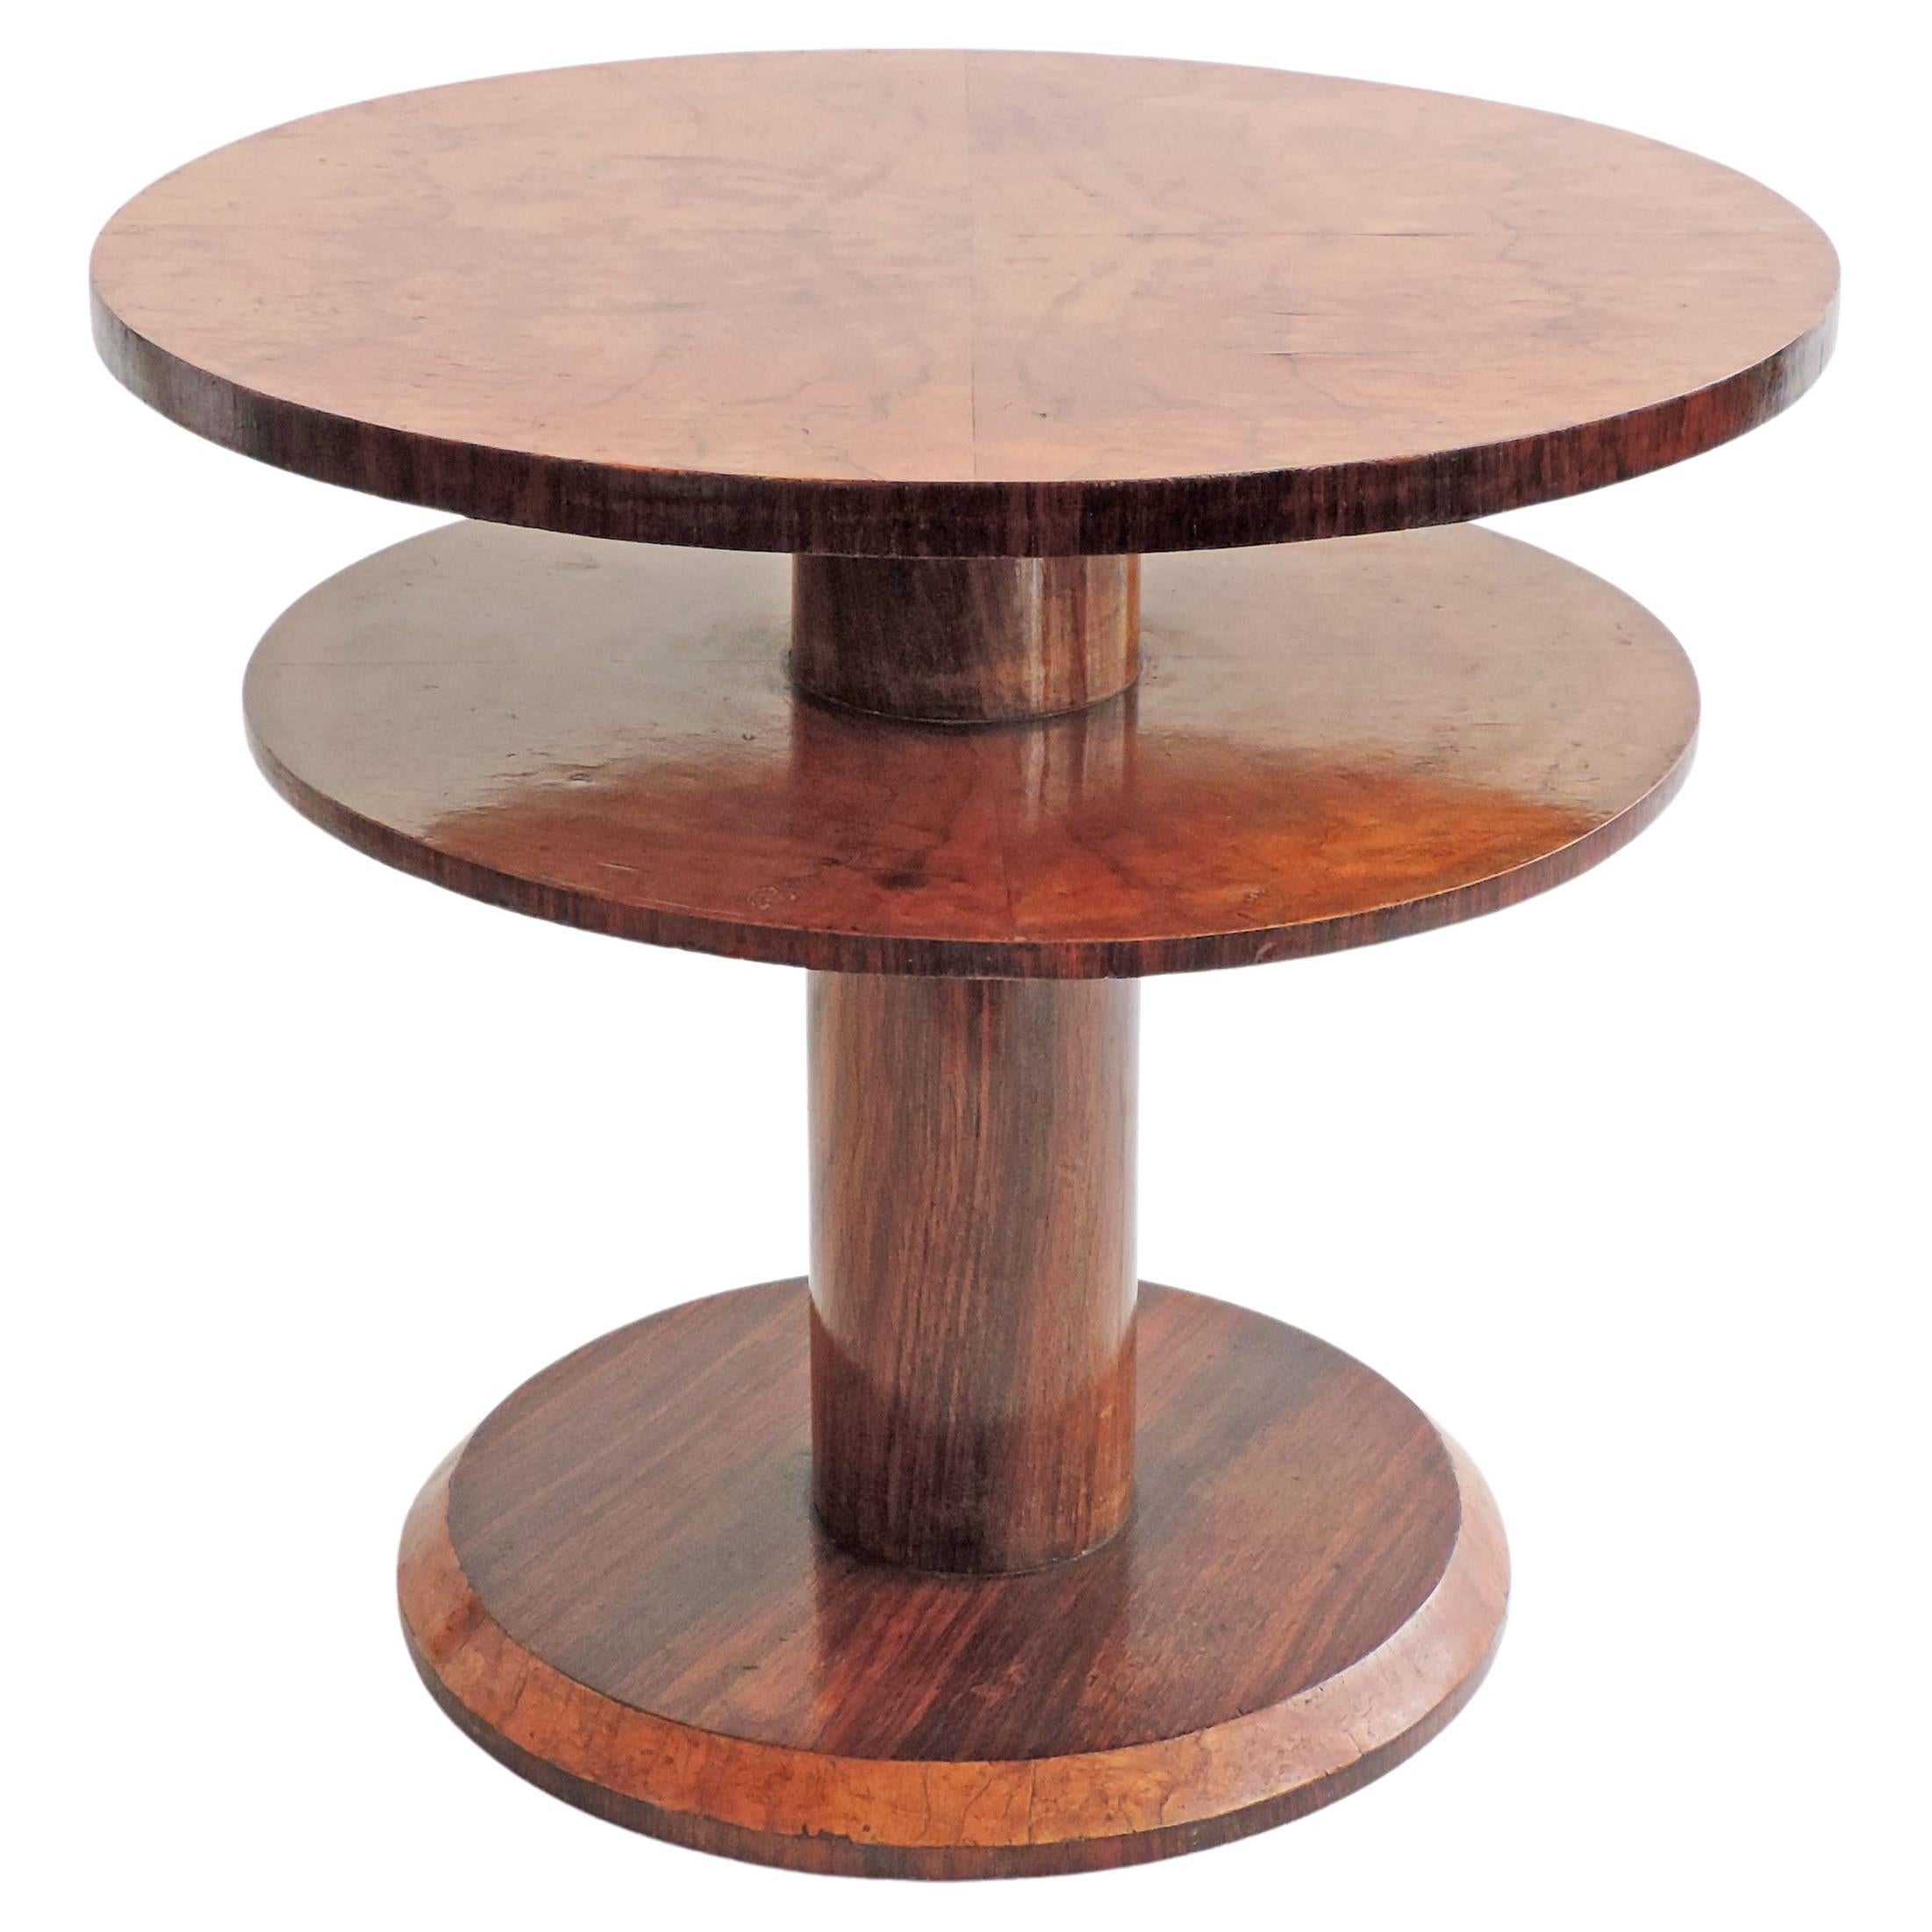 Italian 1930s Two-Tier Round Wooden Coffee Table Attributed to Gio Ponti For Sale